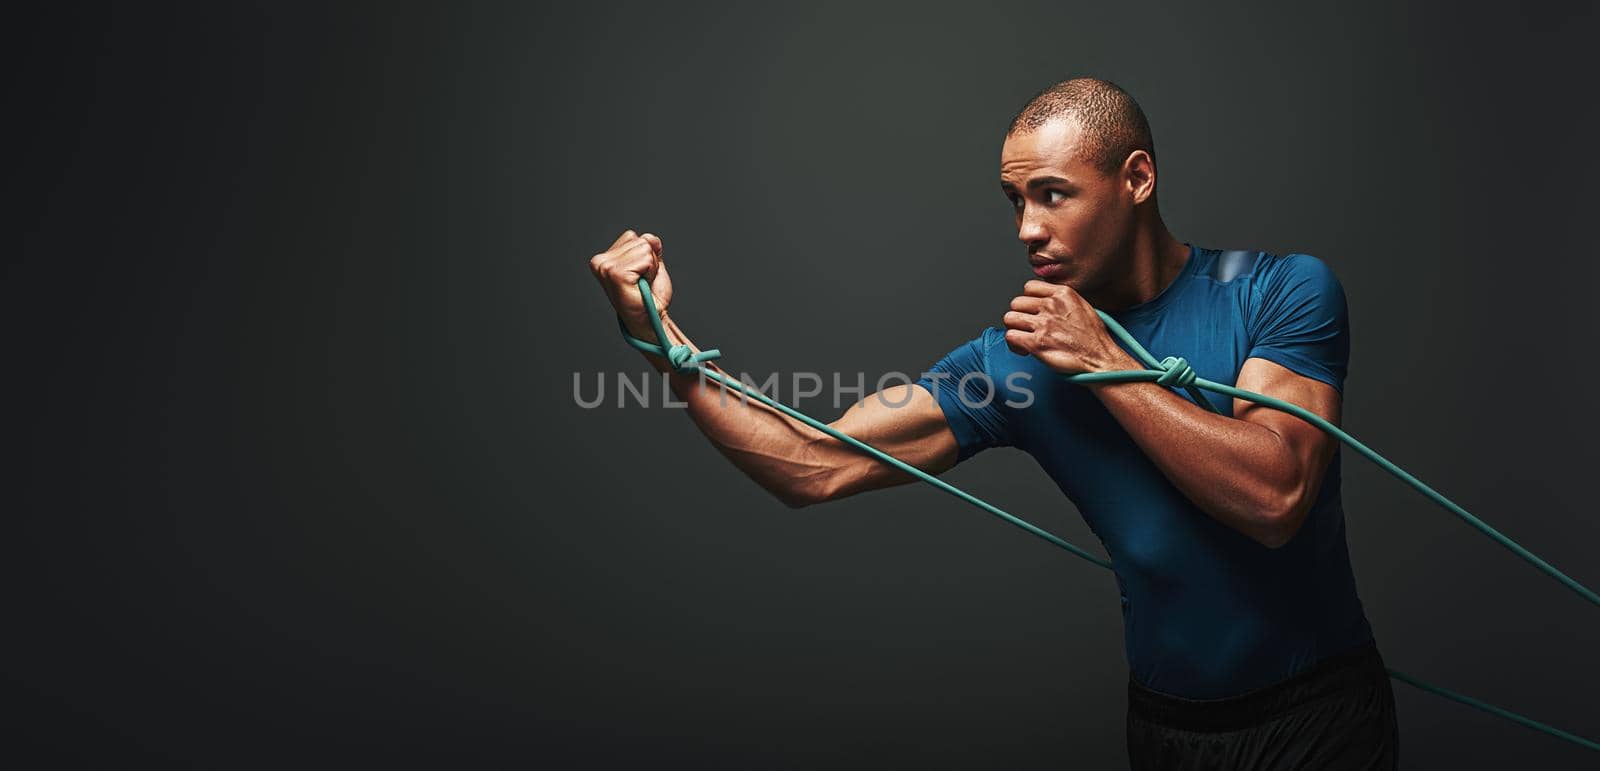 Go Sportsman working out with resistance band over dark background by friendsstock